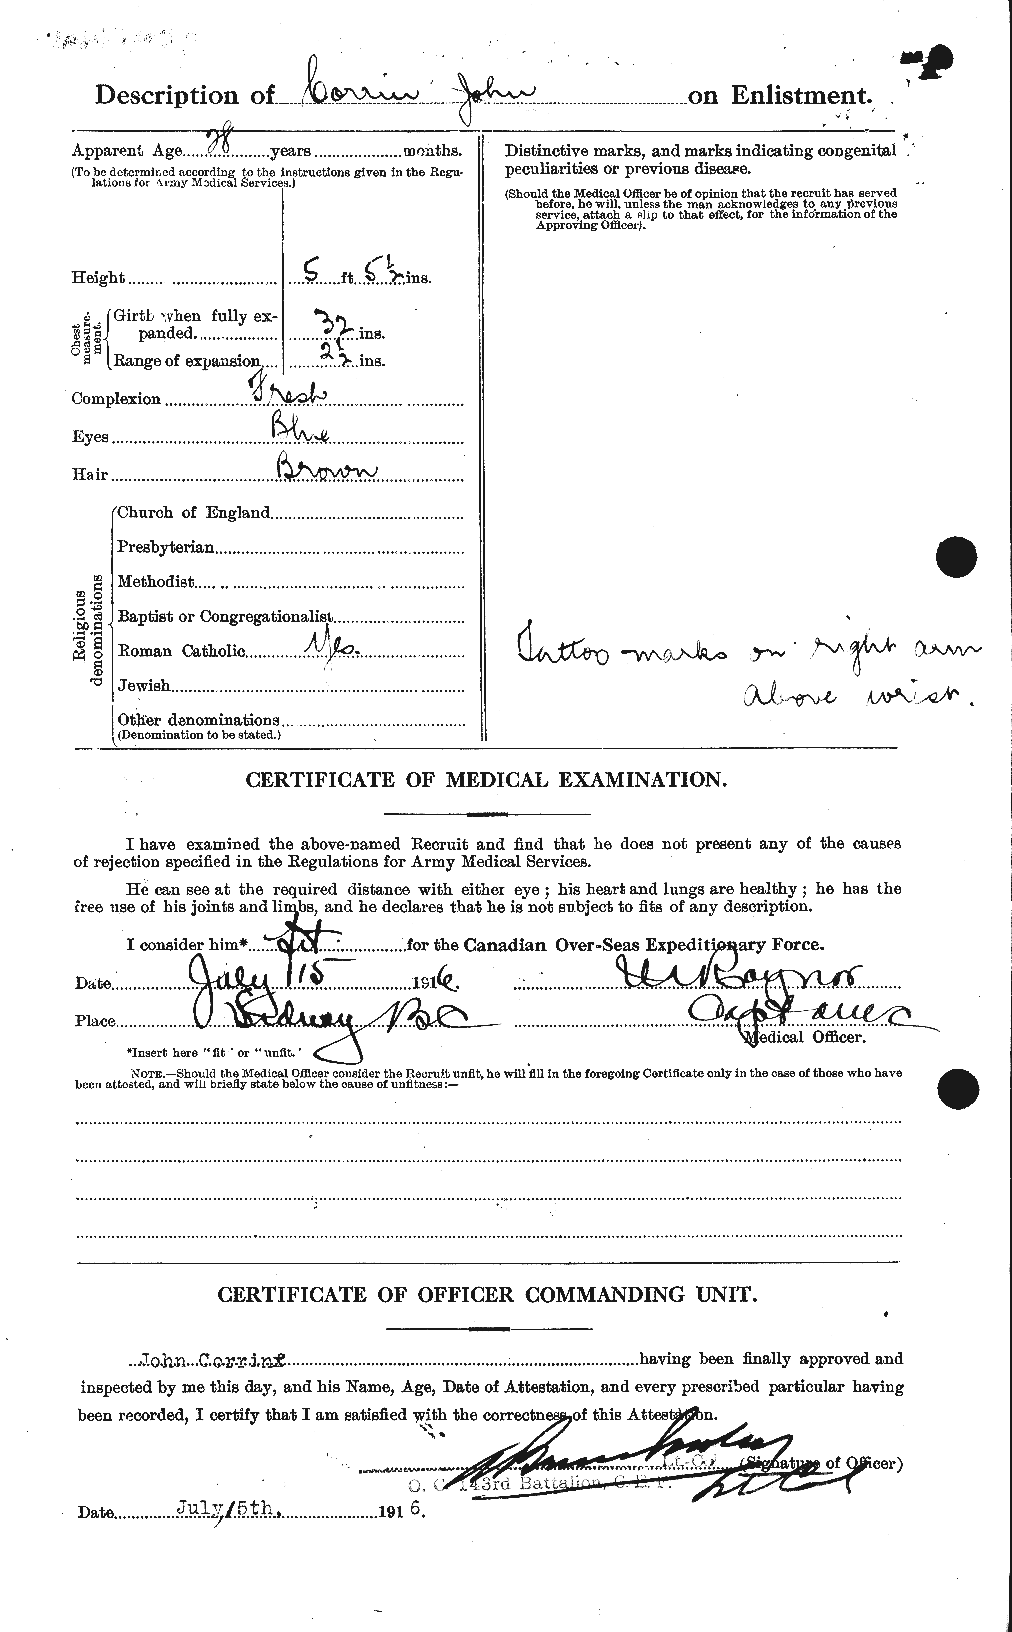 Personnel Records of the First World War - CEF 433562b